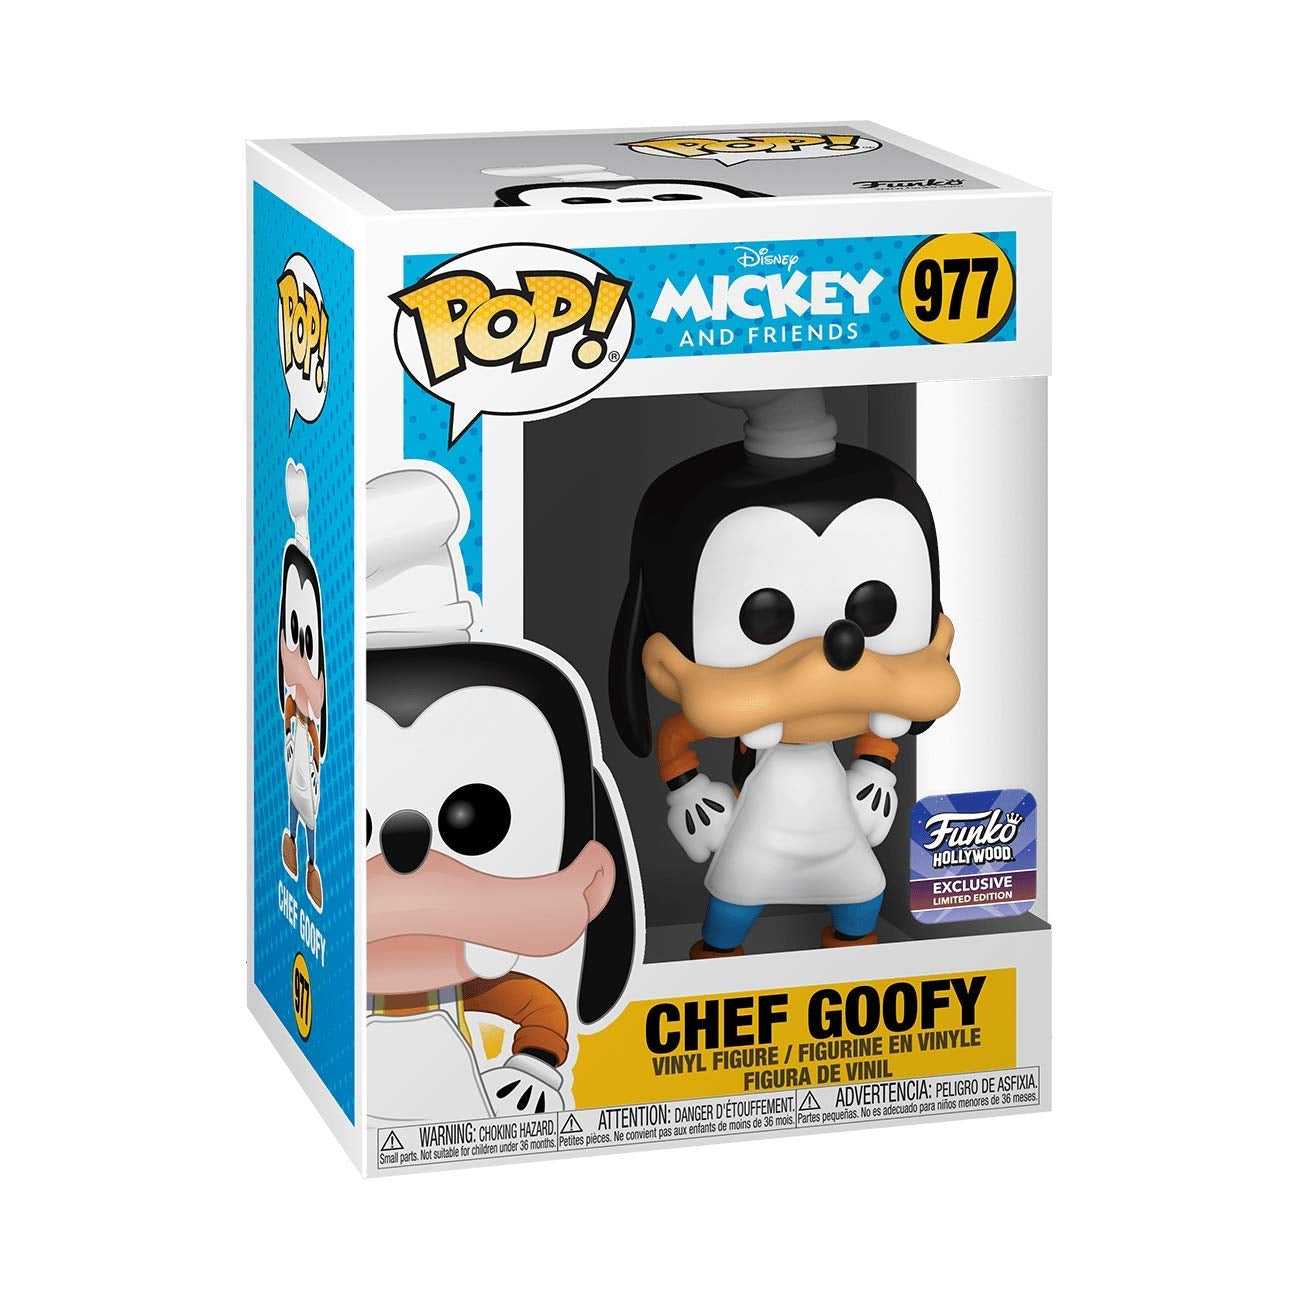 Funko Pop! Disney Mickey and Friends Chef Goofy 977 Funko Hollywood Exclusive + Free Protector